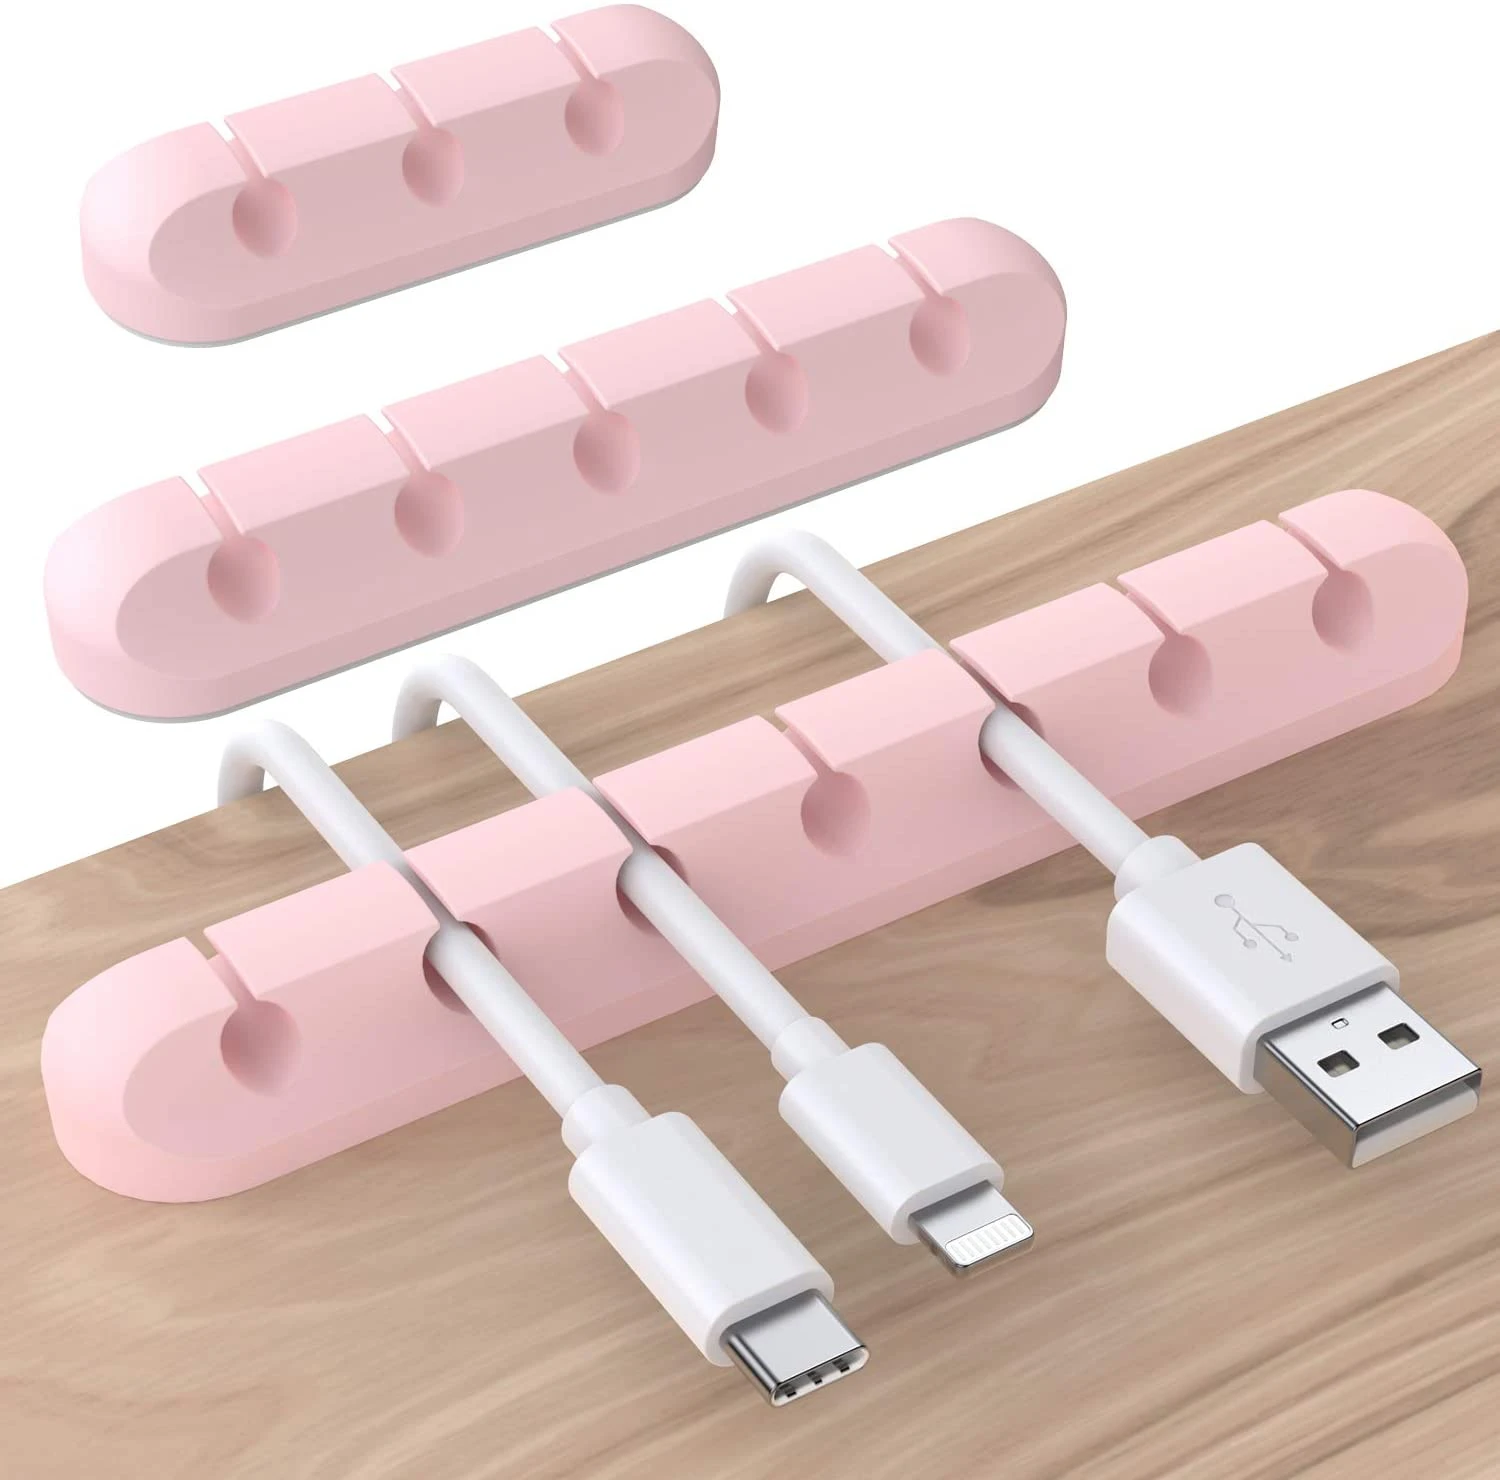 5 slots 3 slots 7slots USB Cable Holder Clips Fixer Cable Management Cord Organizer Clips Silicone Self Adhesive